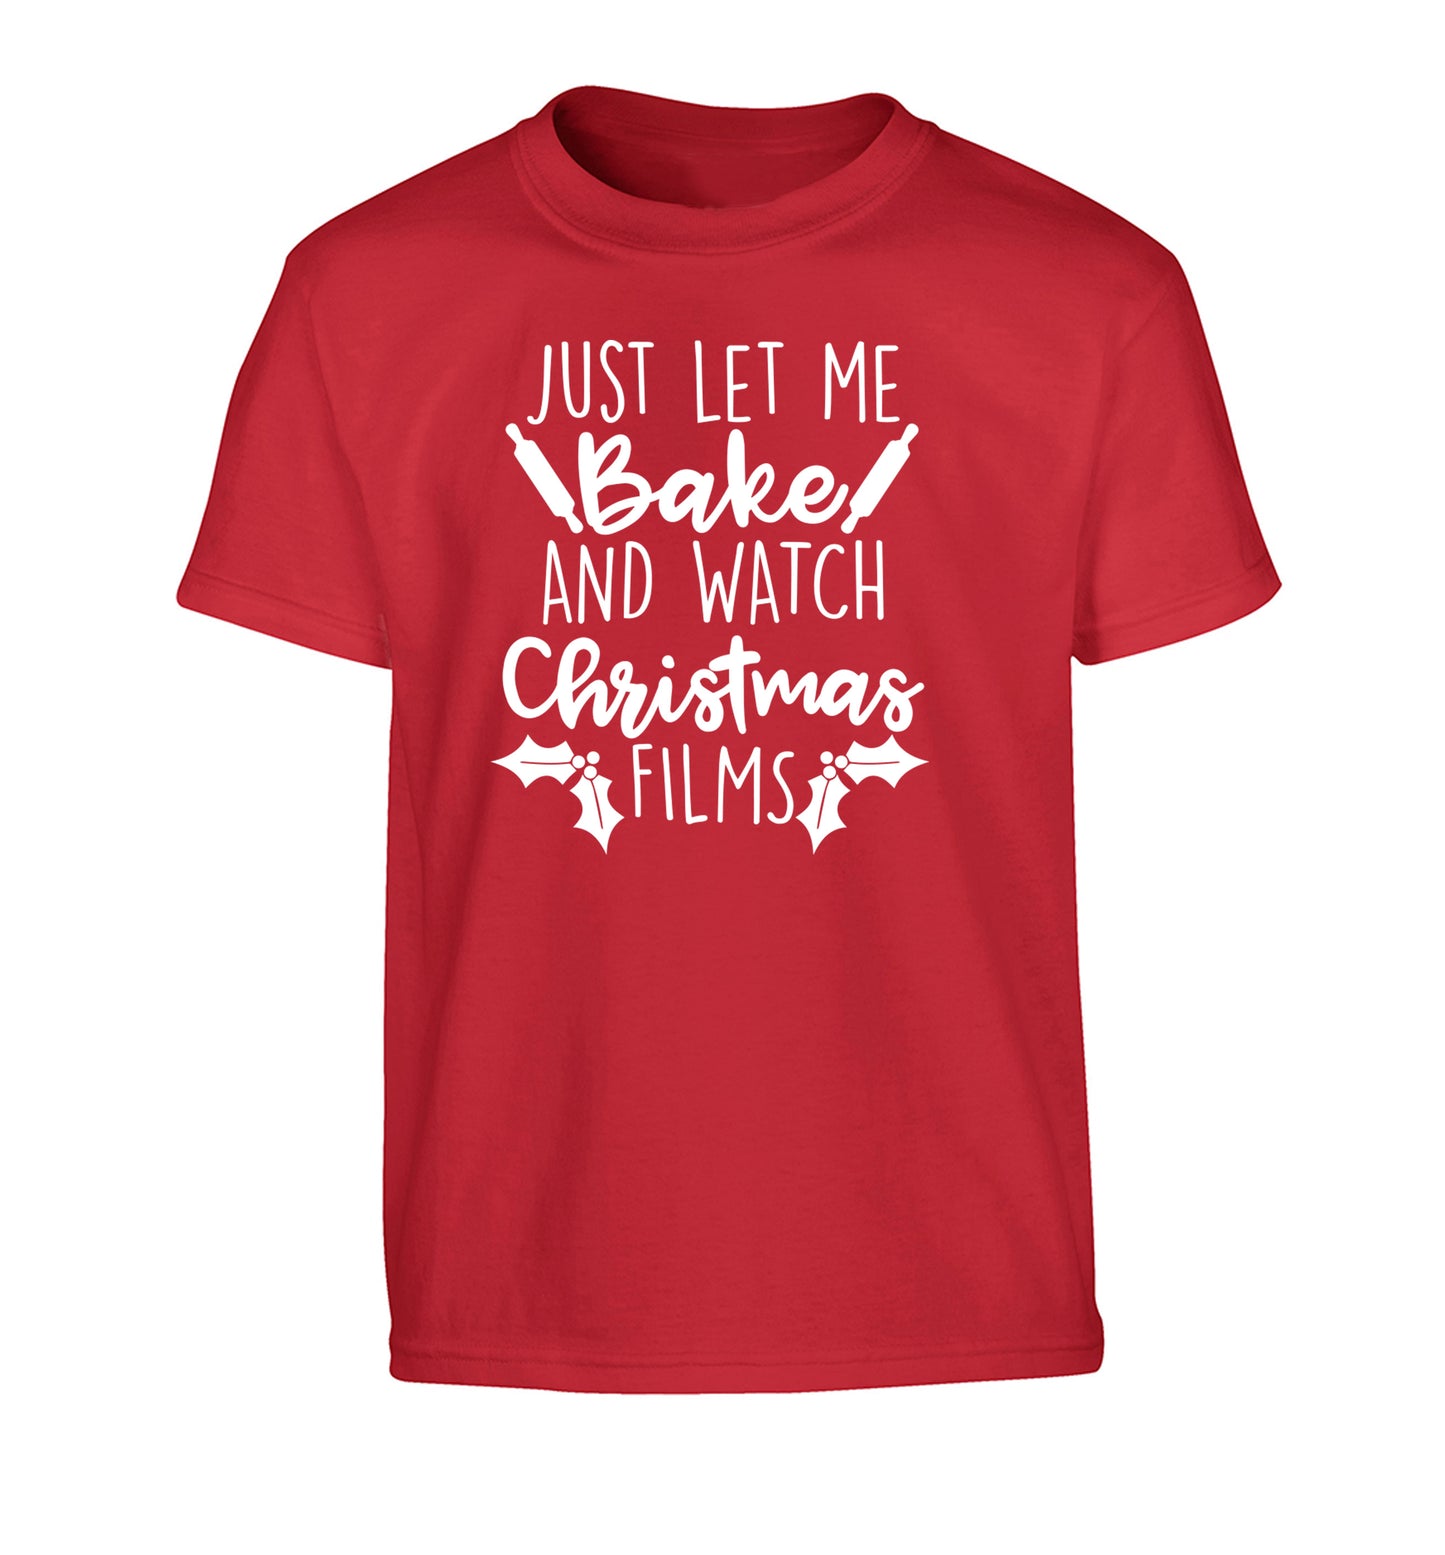 Just let me bake and watch Christmas films Children's red Tshirt 12-14 Years